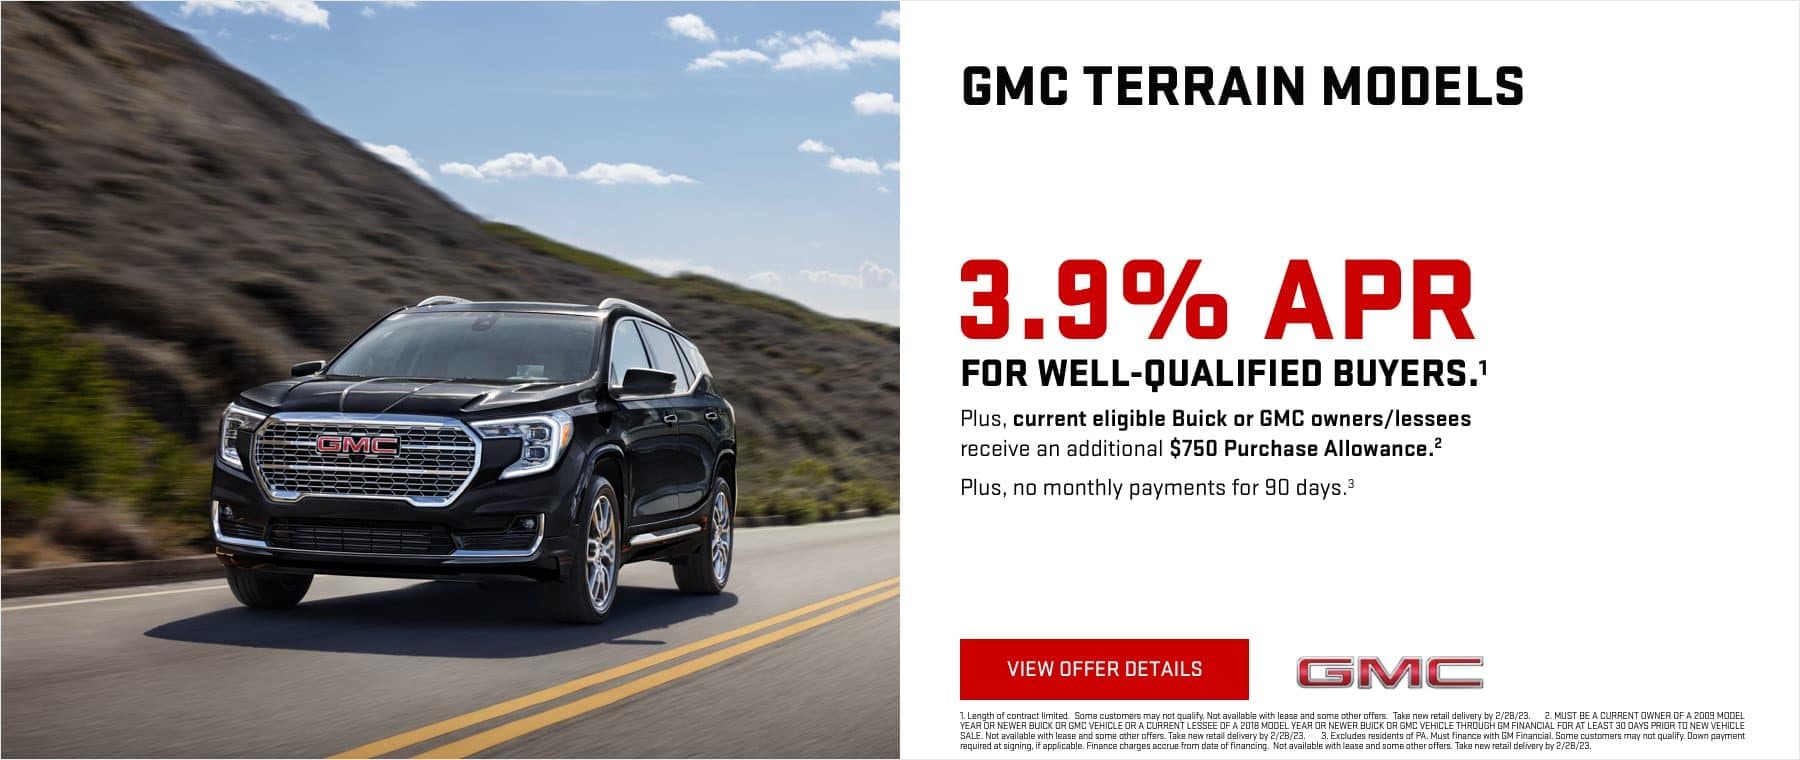 3.9% APR for well-qualified buyers.1 Plus, current eligible Buick or GMC owners/lessees receive an additional $750 Purchase Allowance.2 PLUS, NO MONTHLY PAYMENTS FOR 90 DAYS. 3